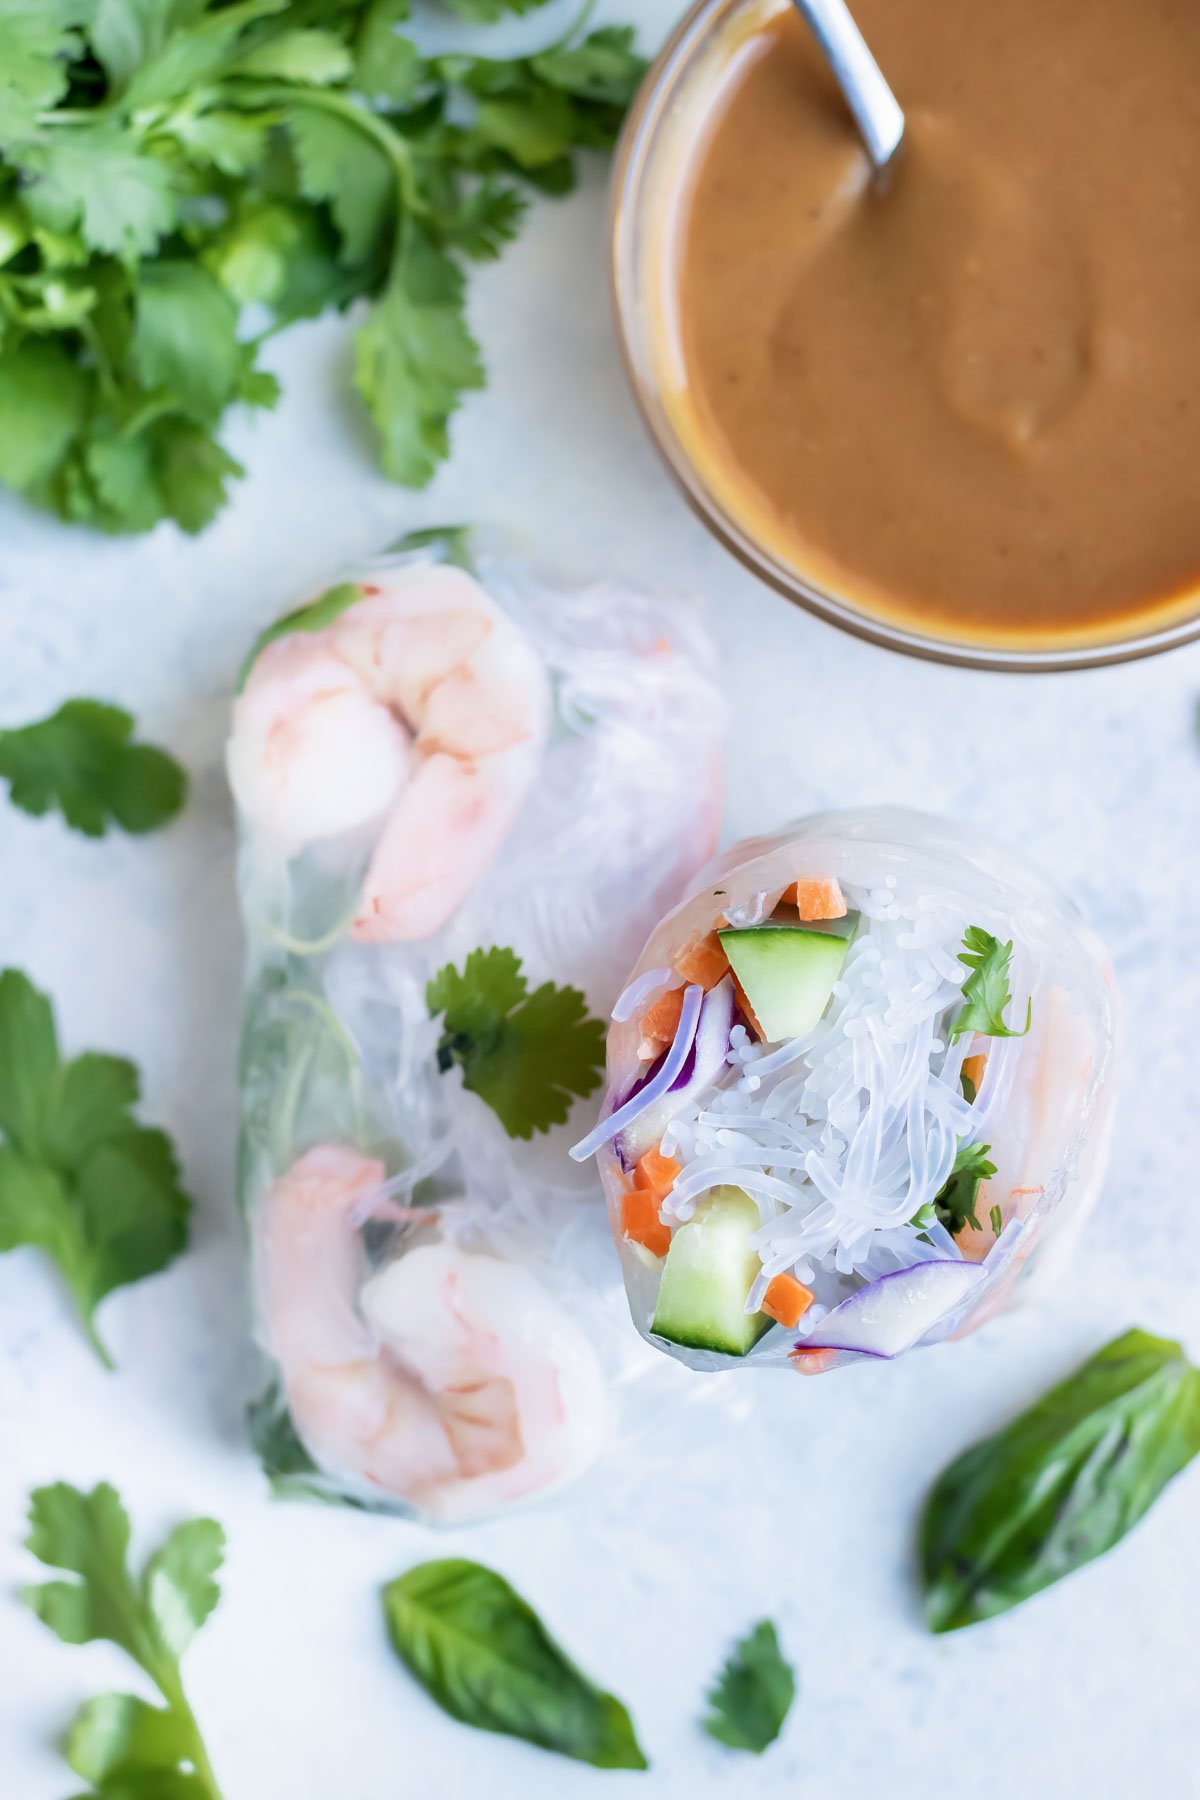 Shrimp and vegetable spring roll is served with a healthy peanut sauce.